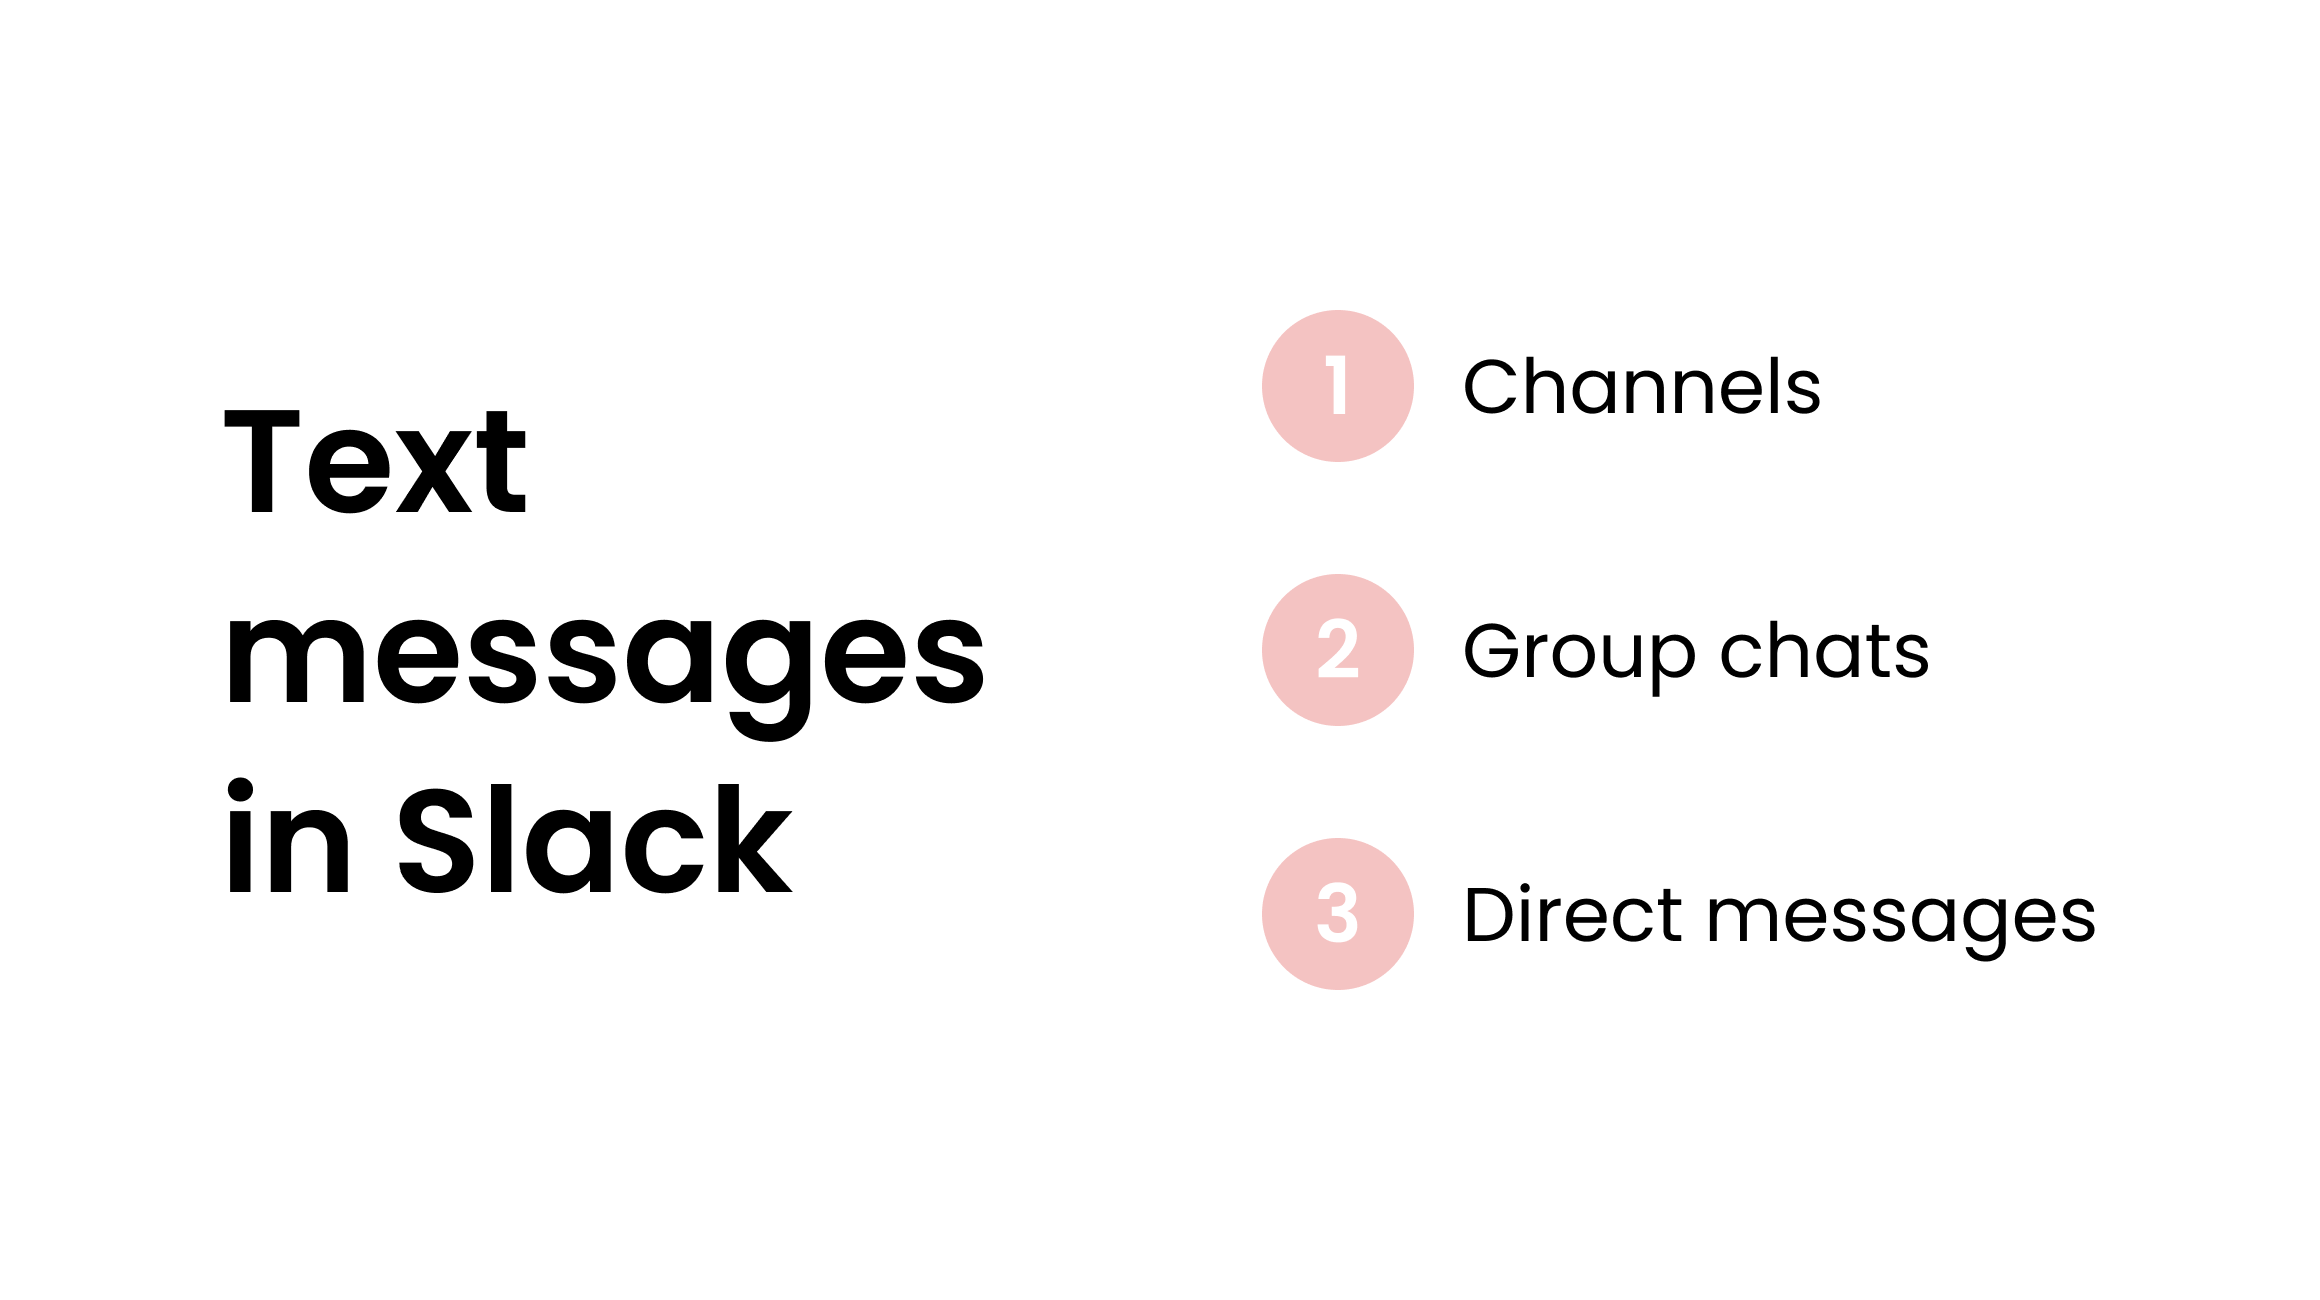 Text messages types in Slack